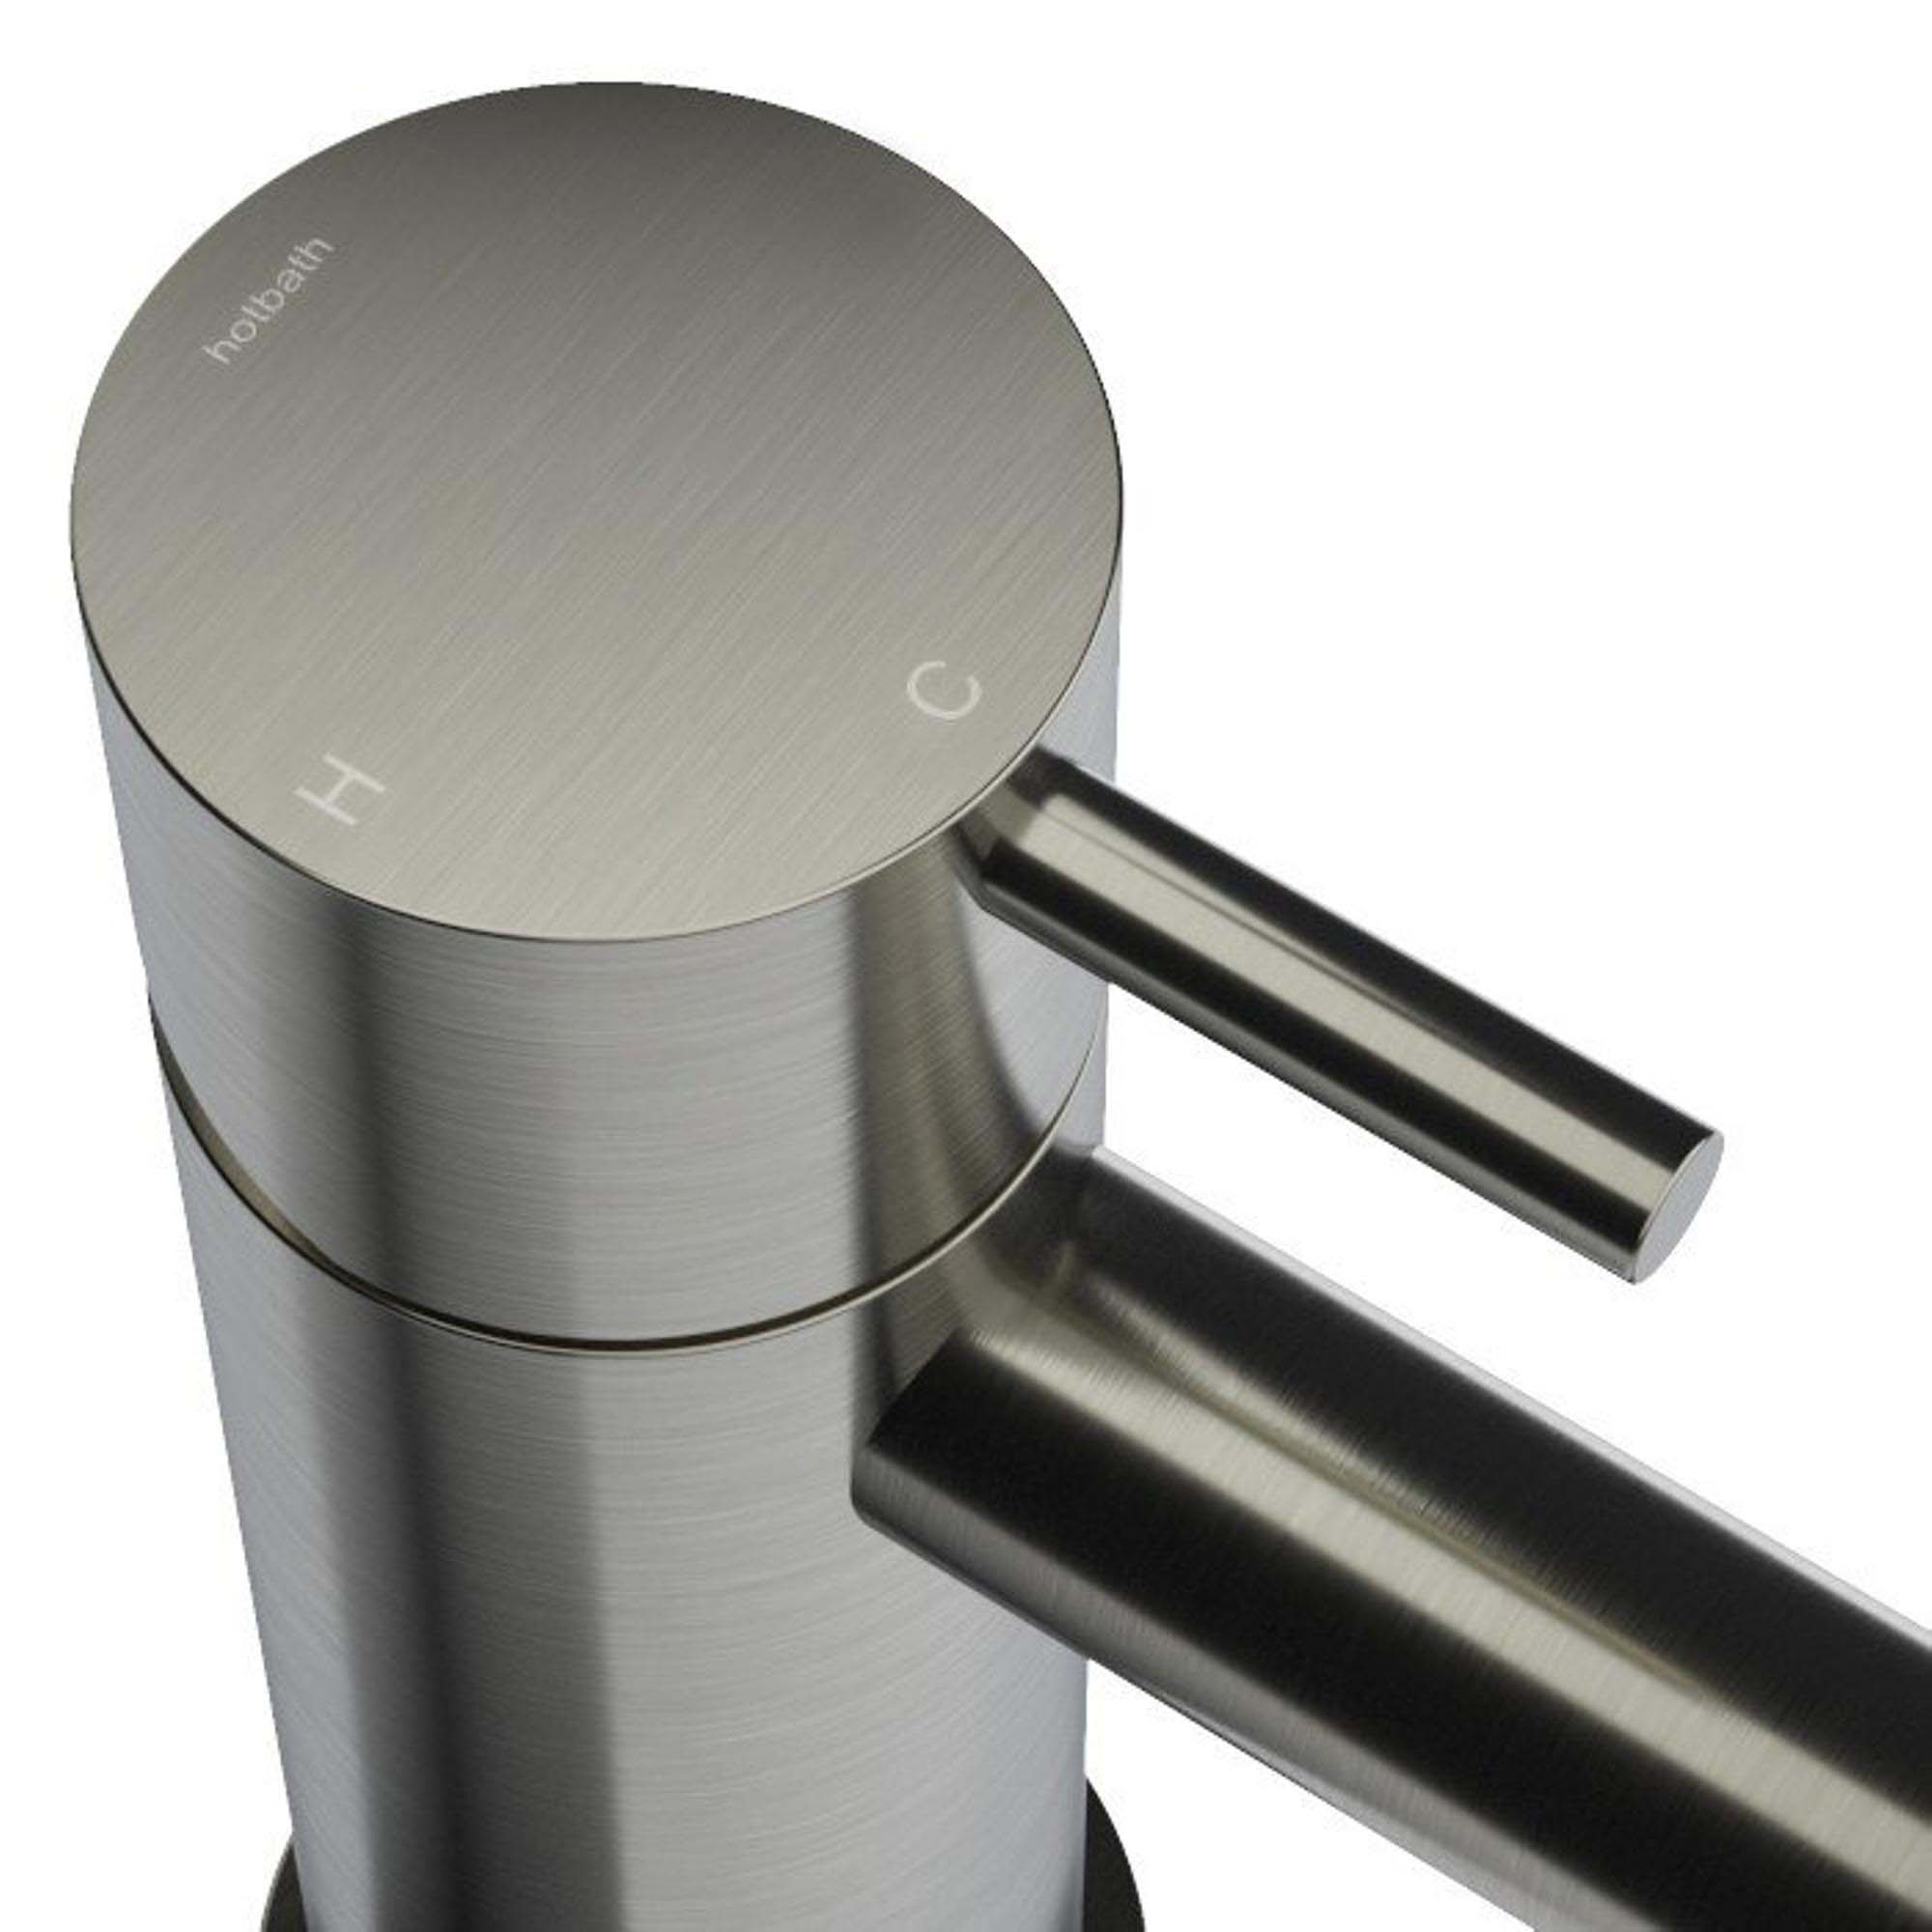 cobber basin mixer tap monobloc straight spout brushed nickel close up